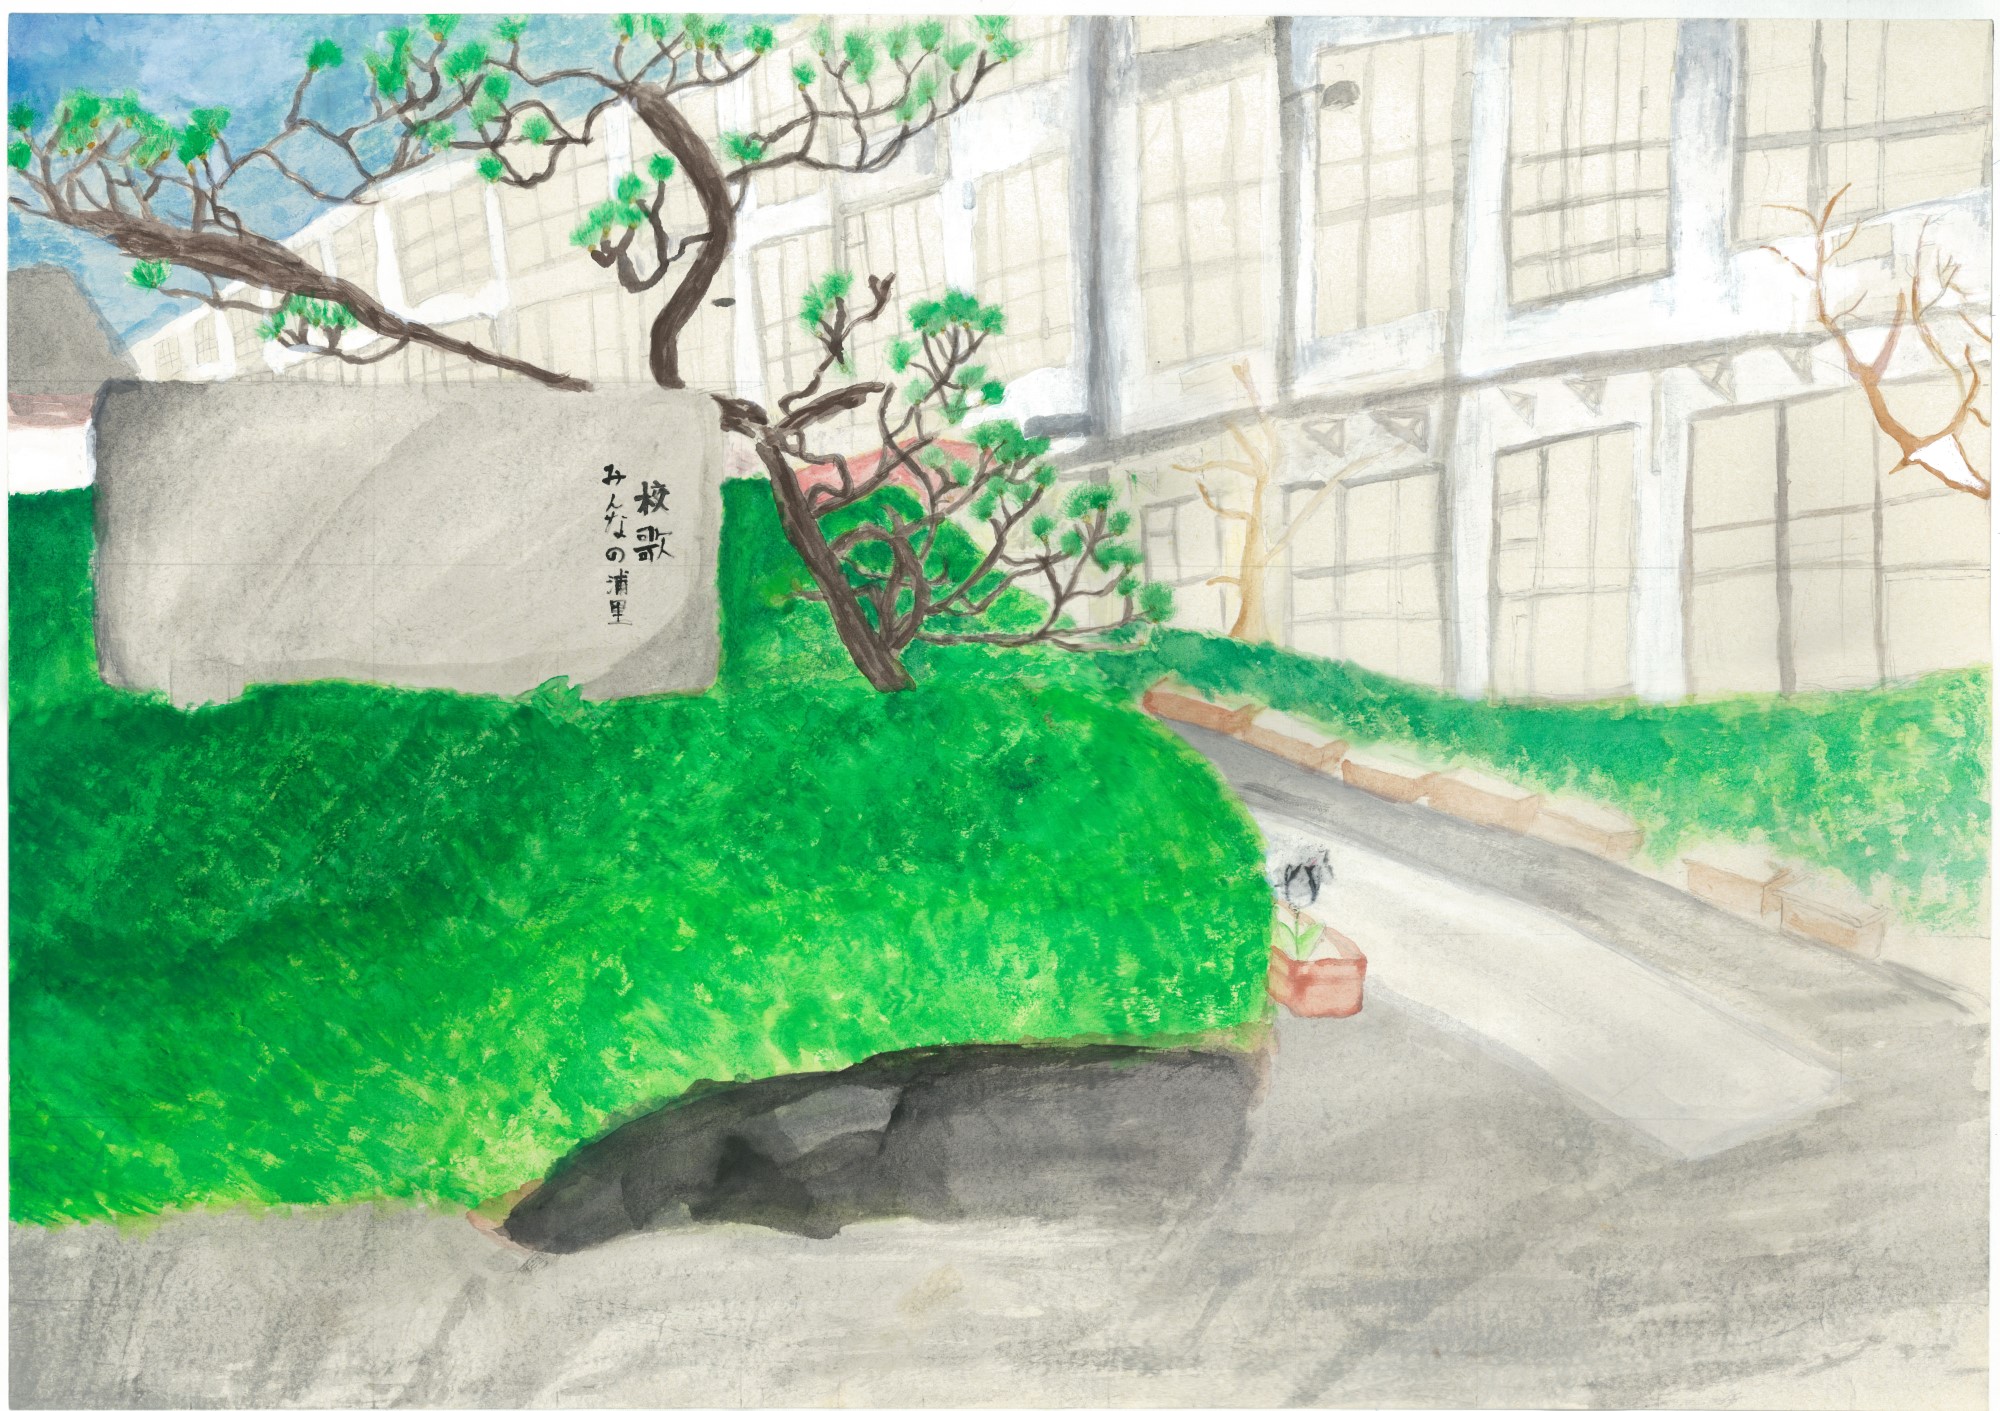 Student artwork - The gorgeous road I always pass, just looking at it makes me feel better